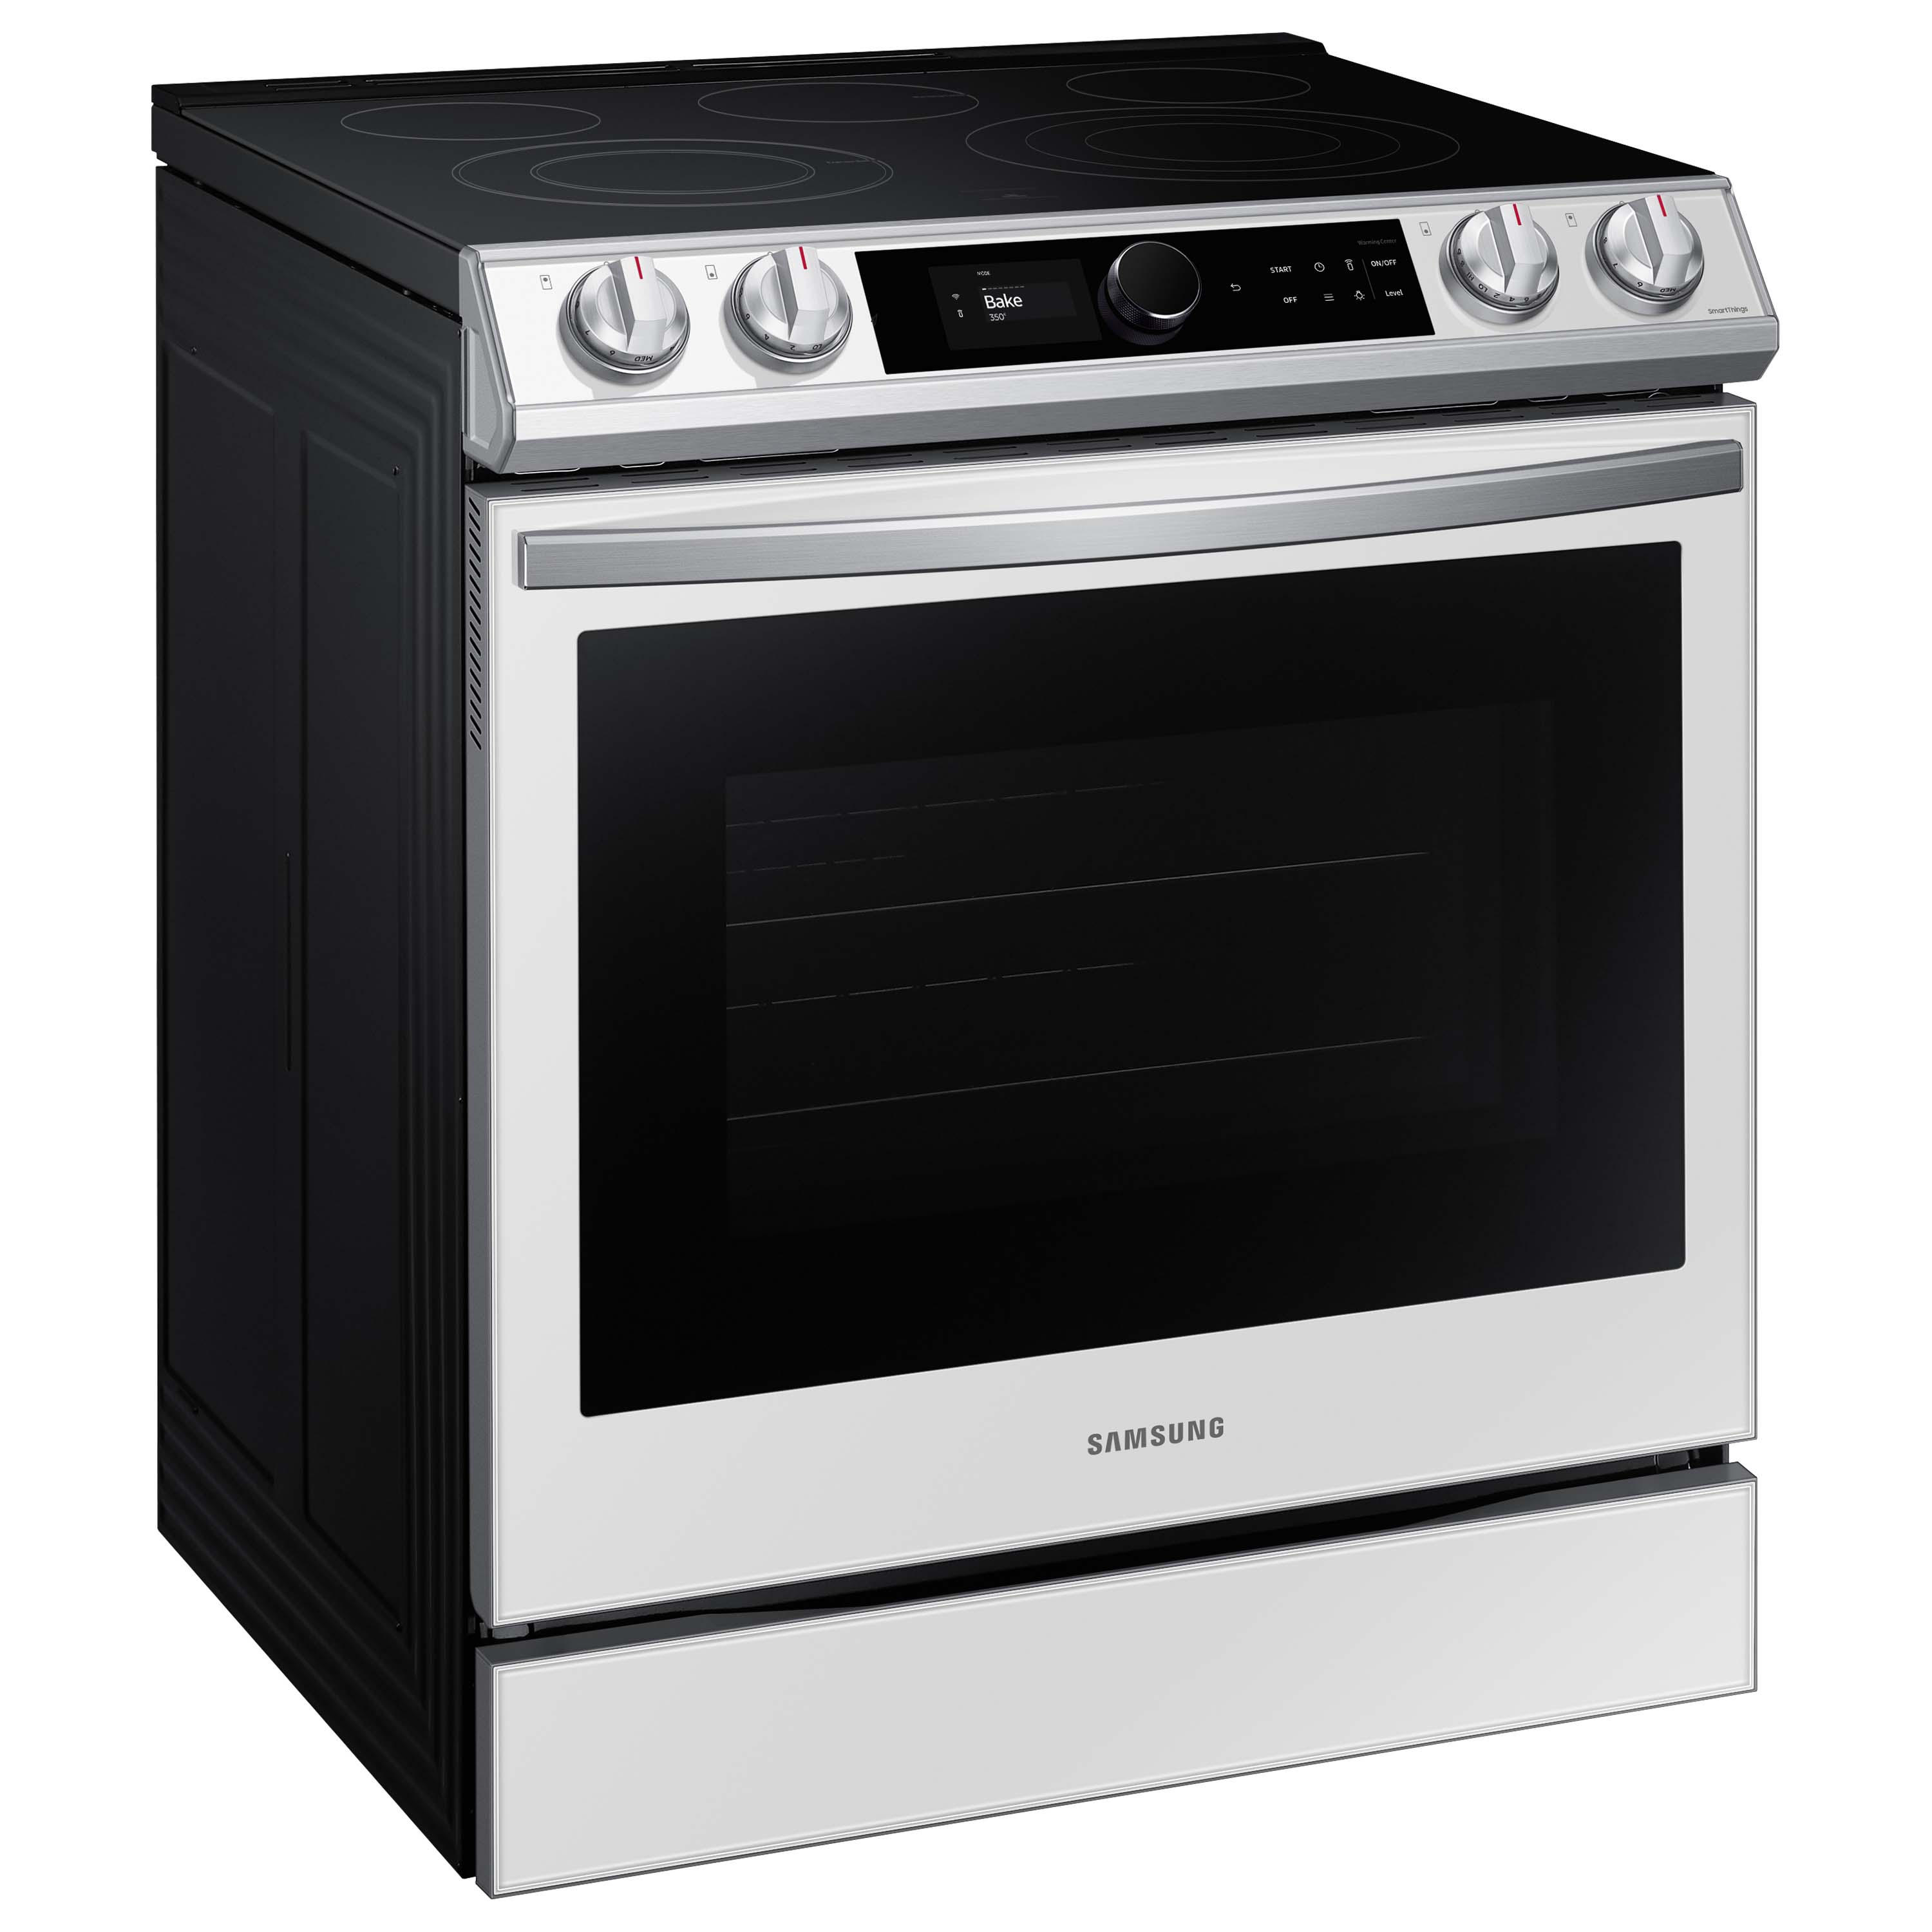 12 Best Features of the Samsung Electric Range, Johnnie's Appliances